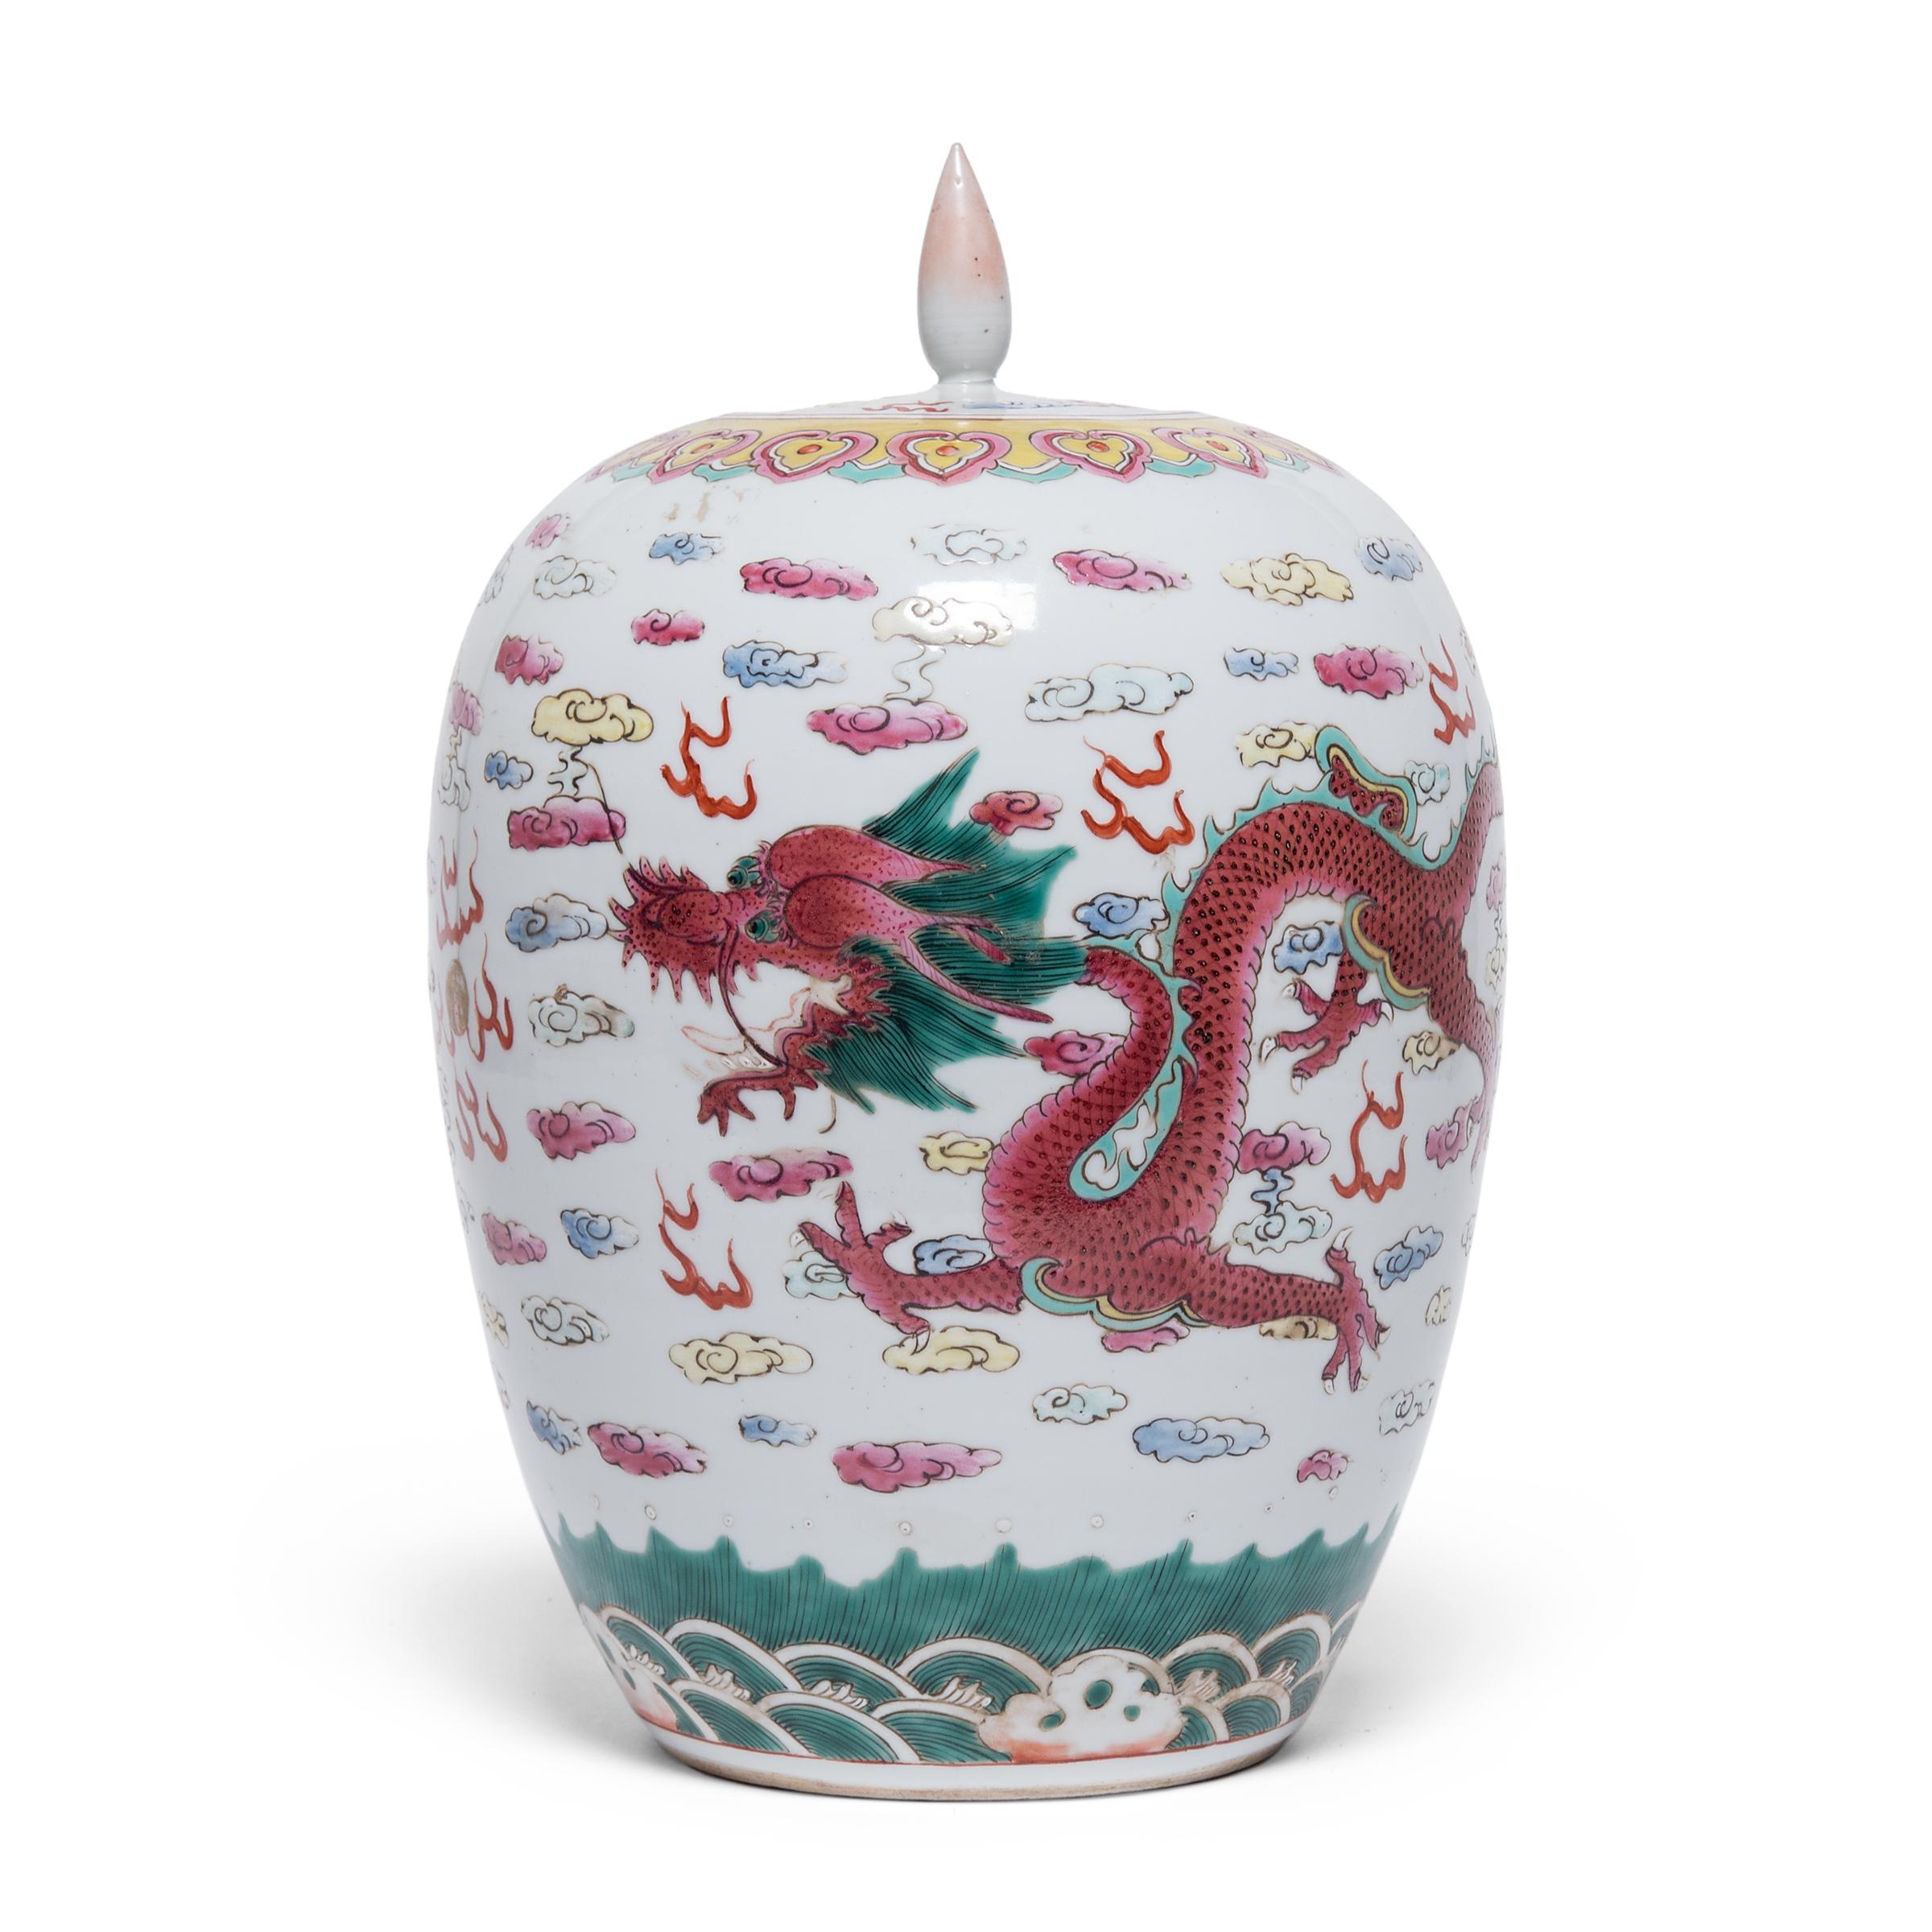 Enameled Chinese Famille Rose Ginger Jar with Celestial Dragons, c. 1900